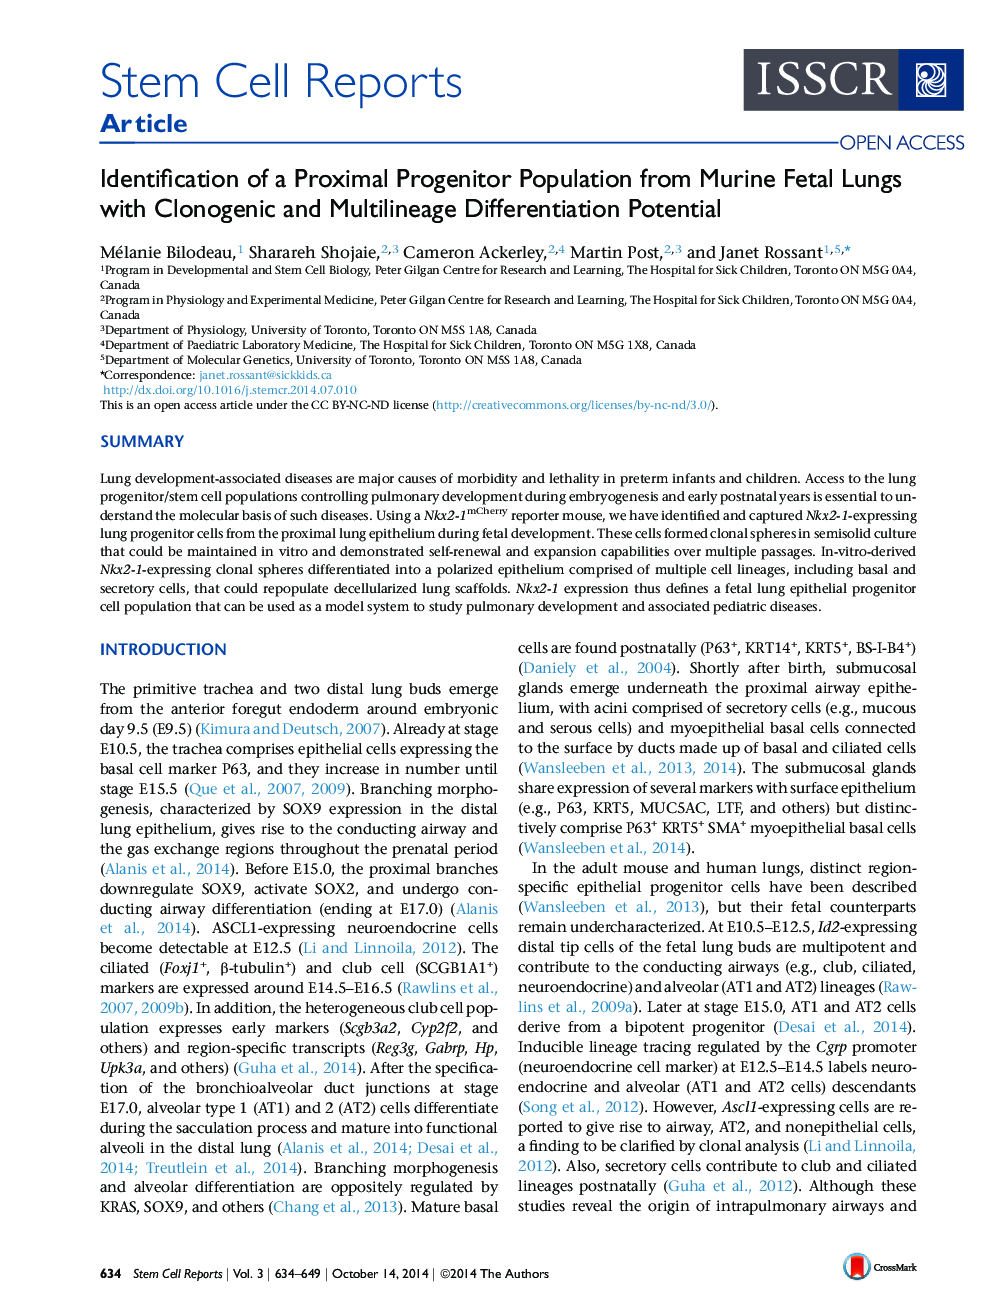 Identification of a Proximal Progenitor Population from Murine Fetal Lungs with Clonogenic and Multilineage Differentiation Potential 